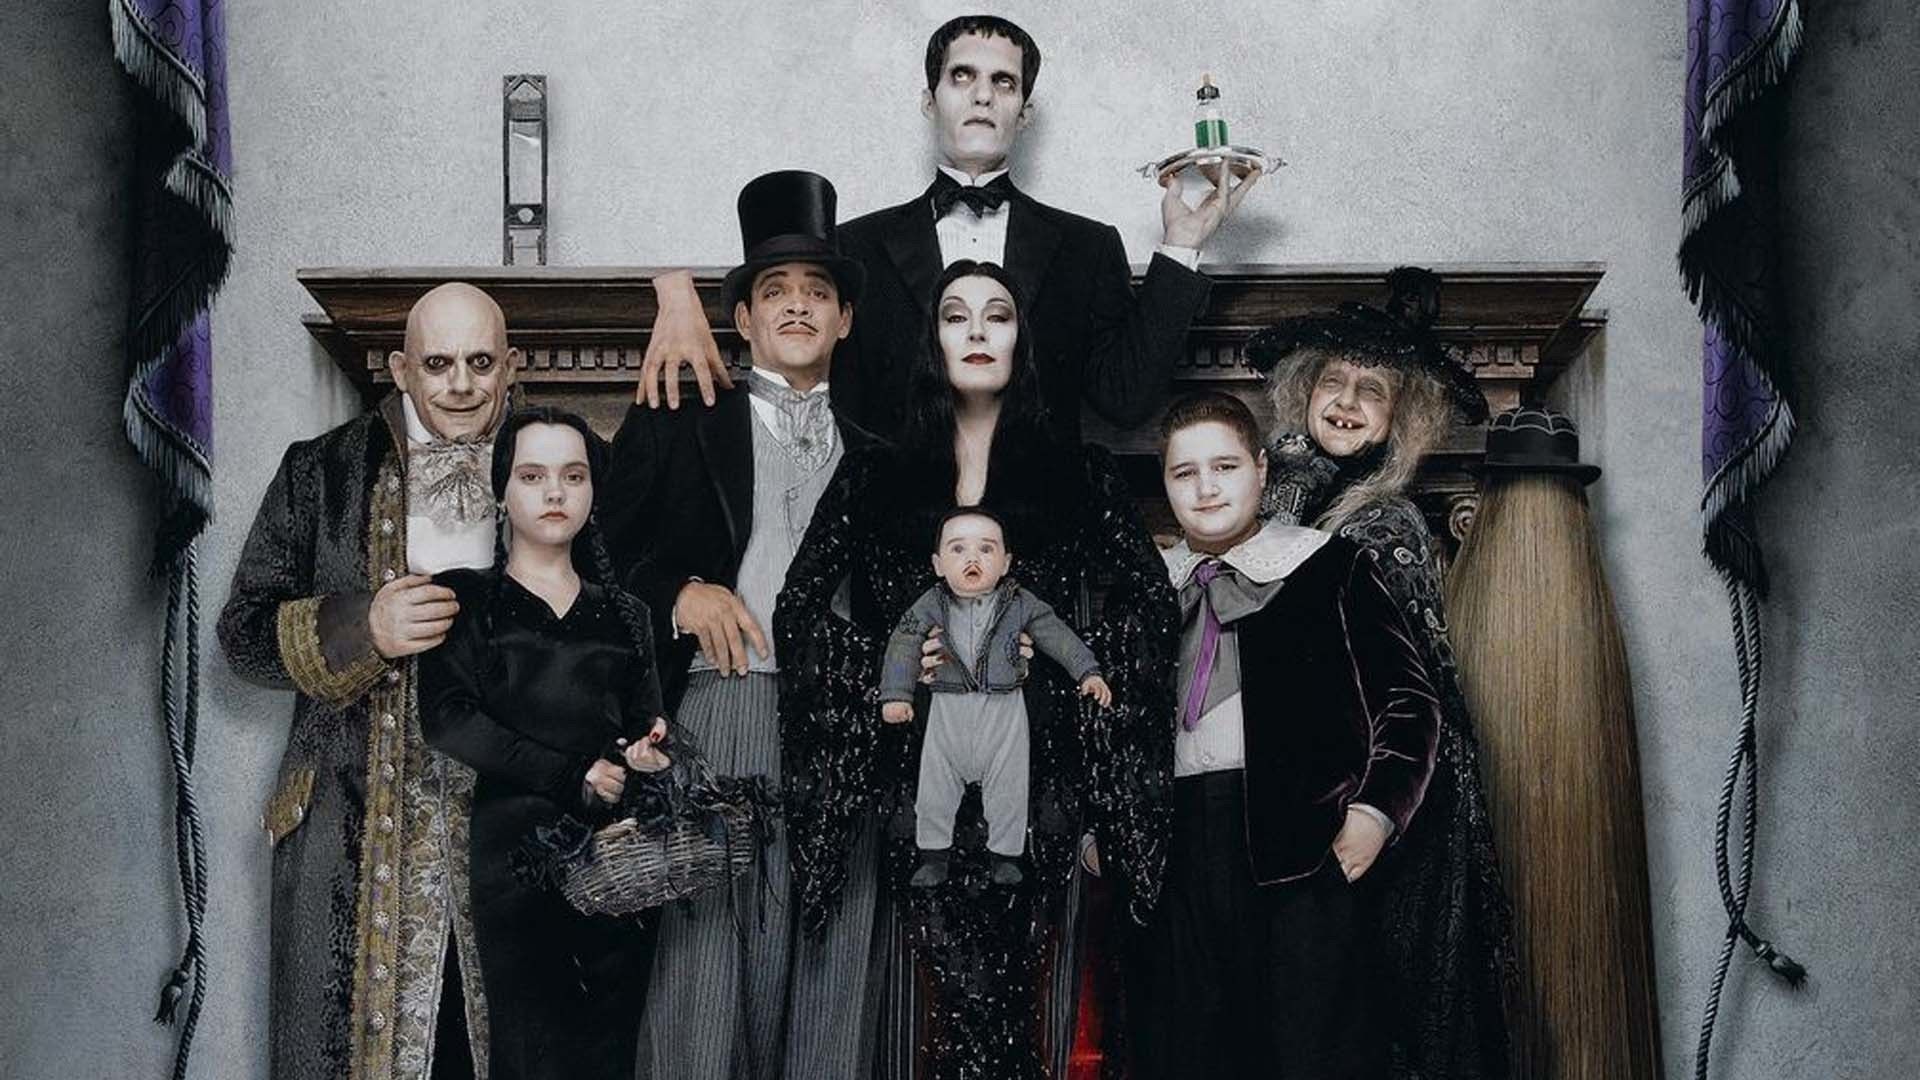 The Addams Family Wallpaper Free The Addams Family Background